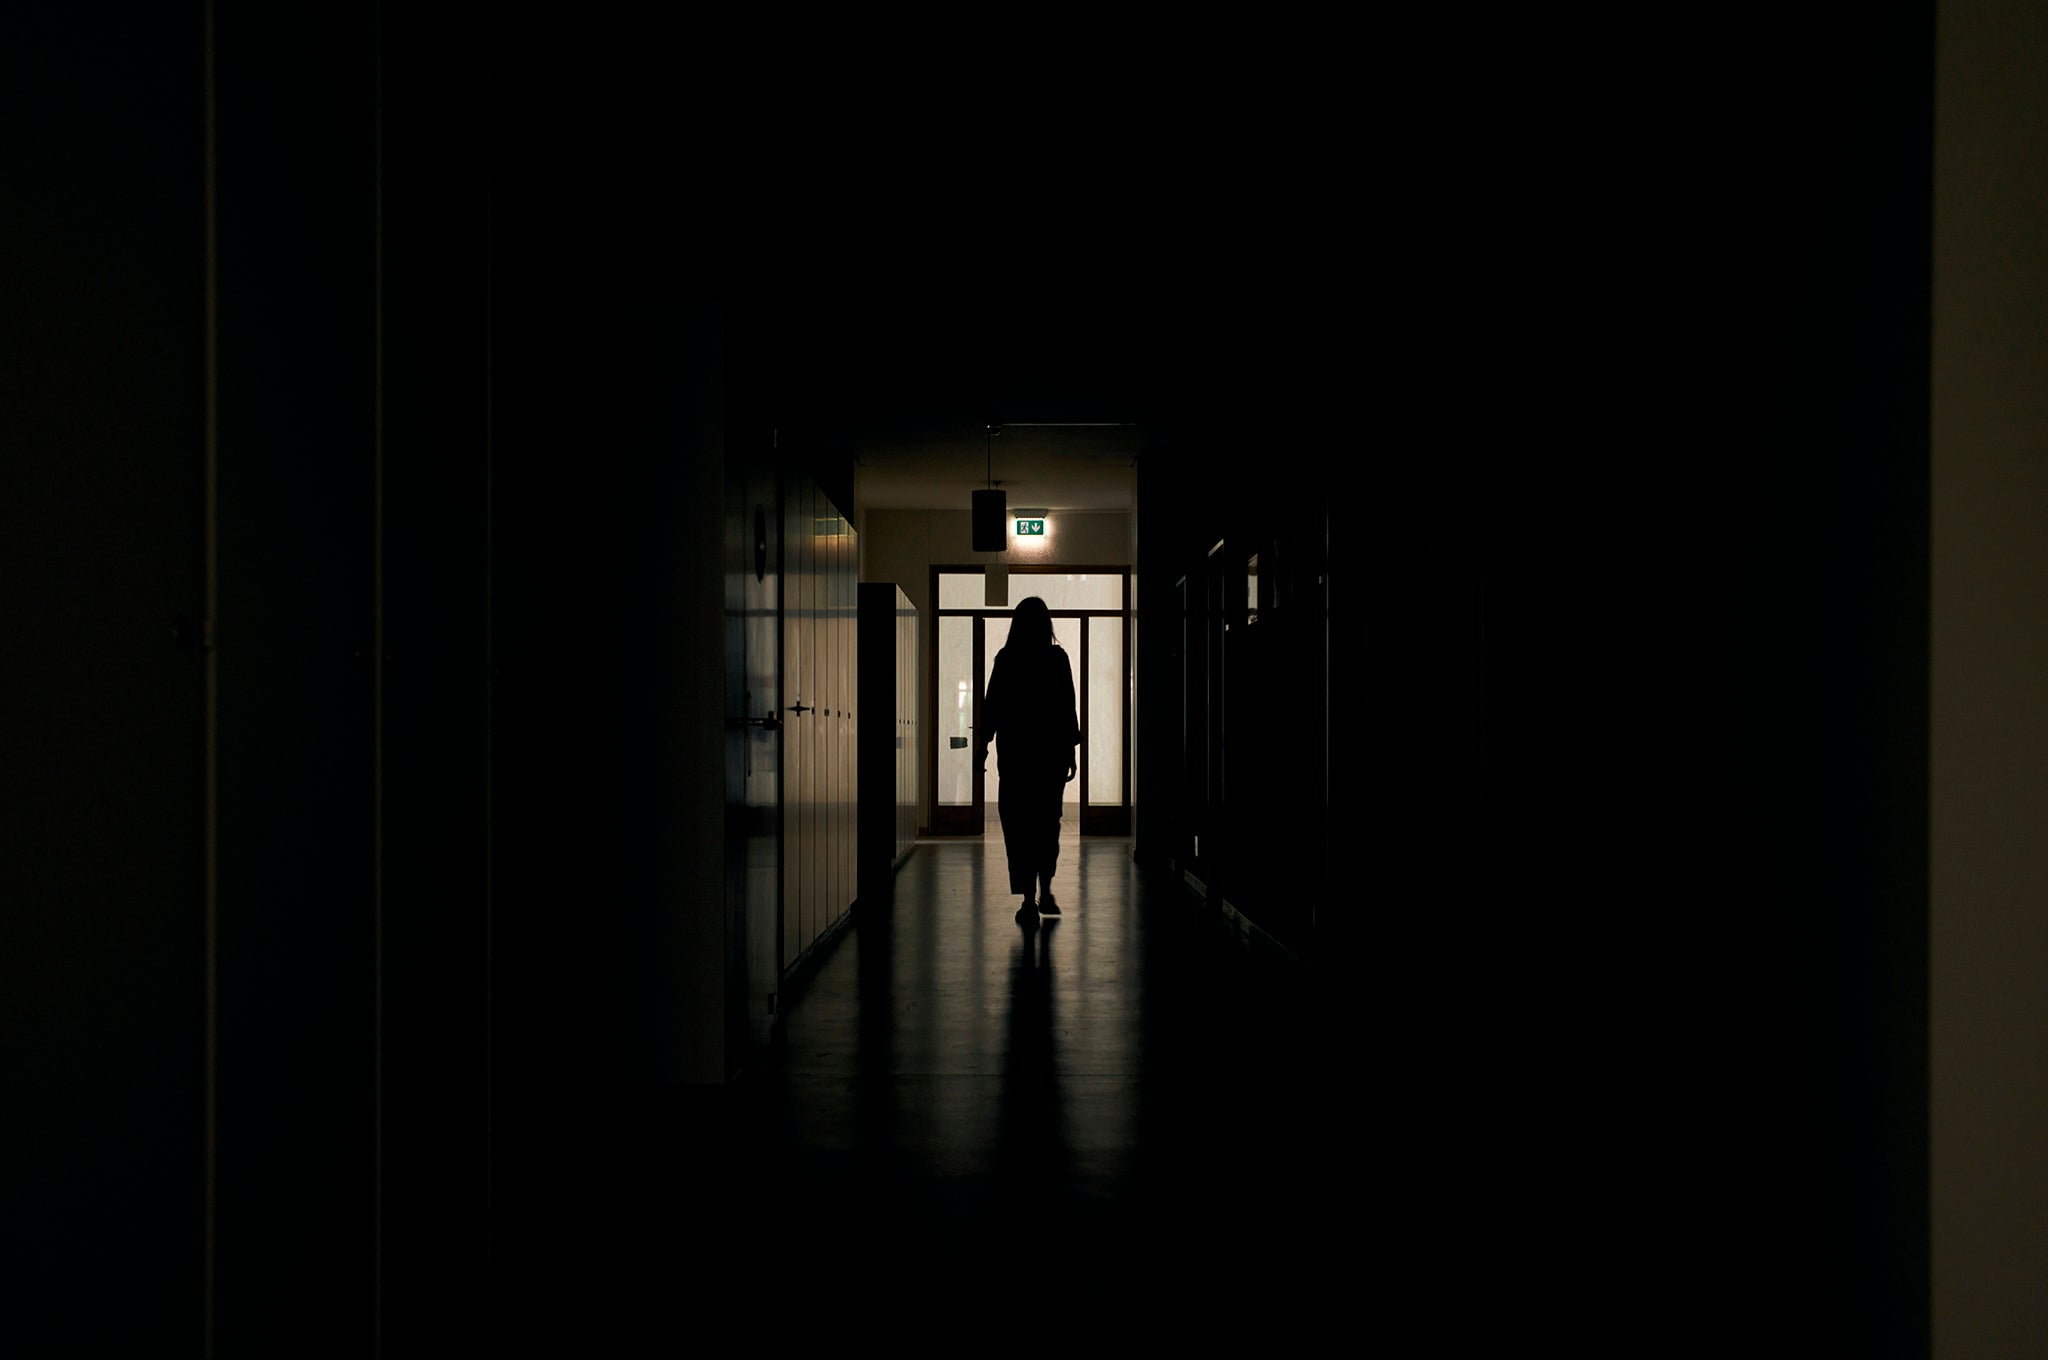 Hana, 28, from Odesa, walks the long gloomy corridor in the southern wing of the convent